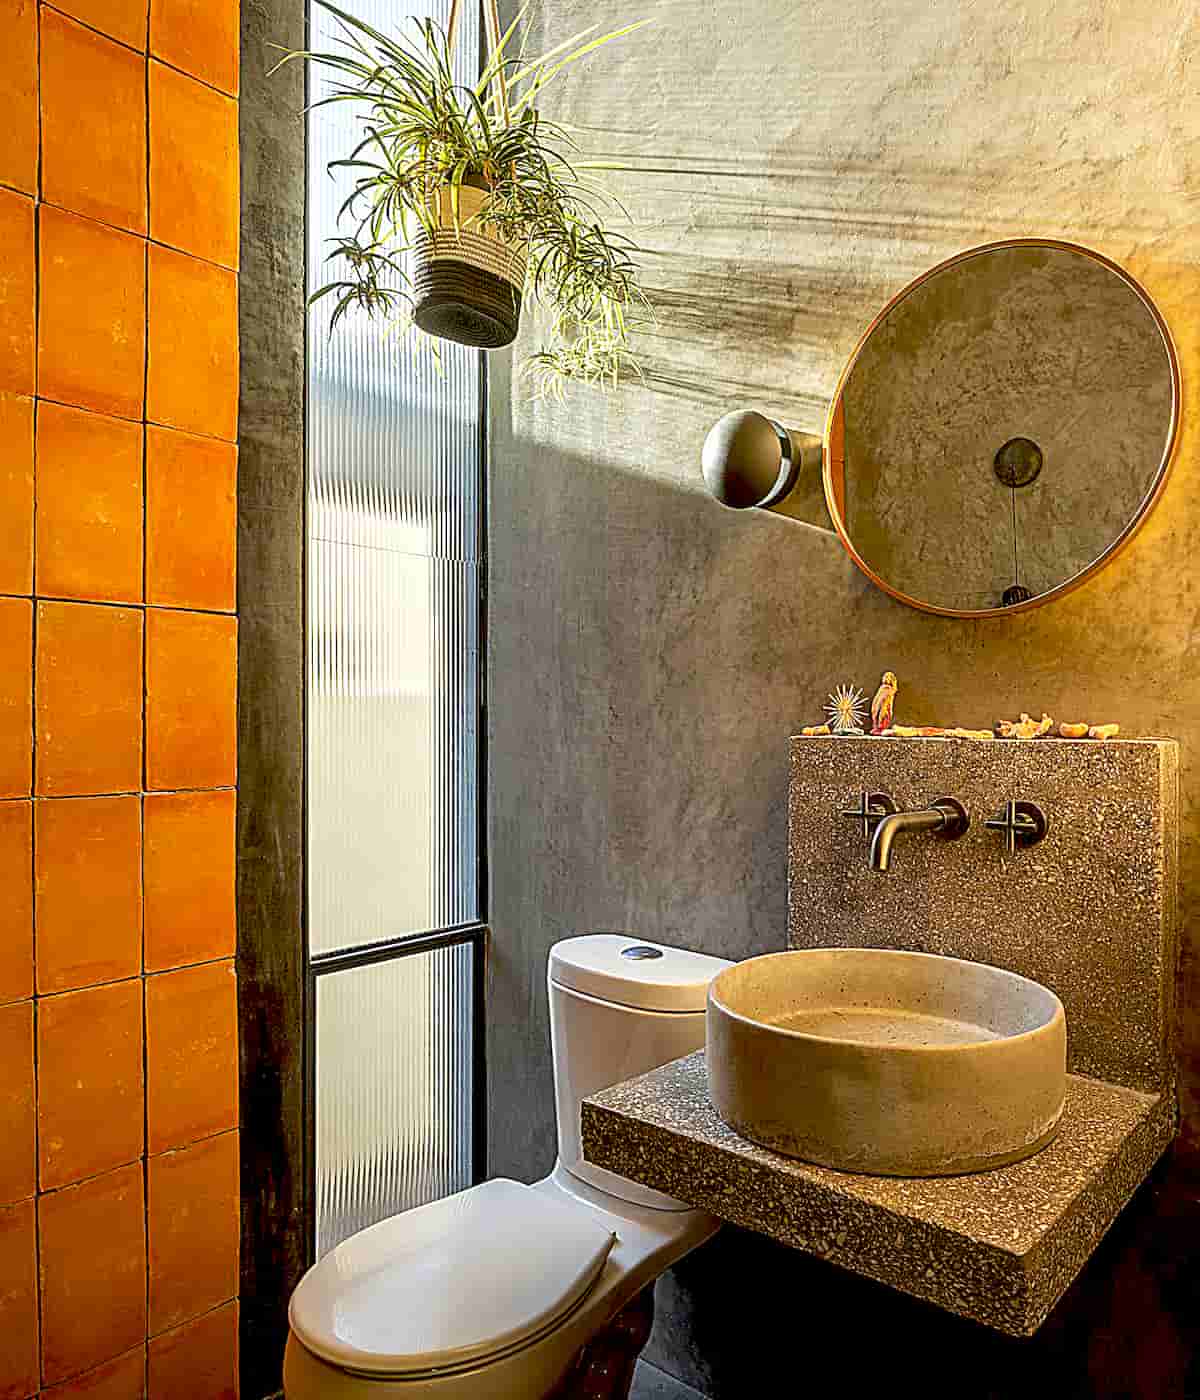 Architect Mauricio Alonso Uses Ceramics and Wood to Add Texture to a Concrete House in Mexic